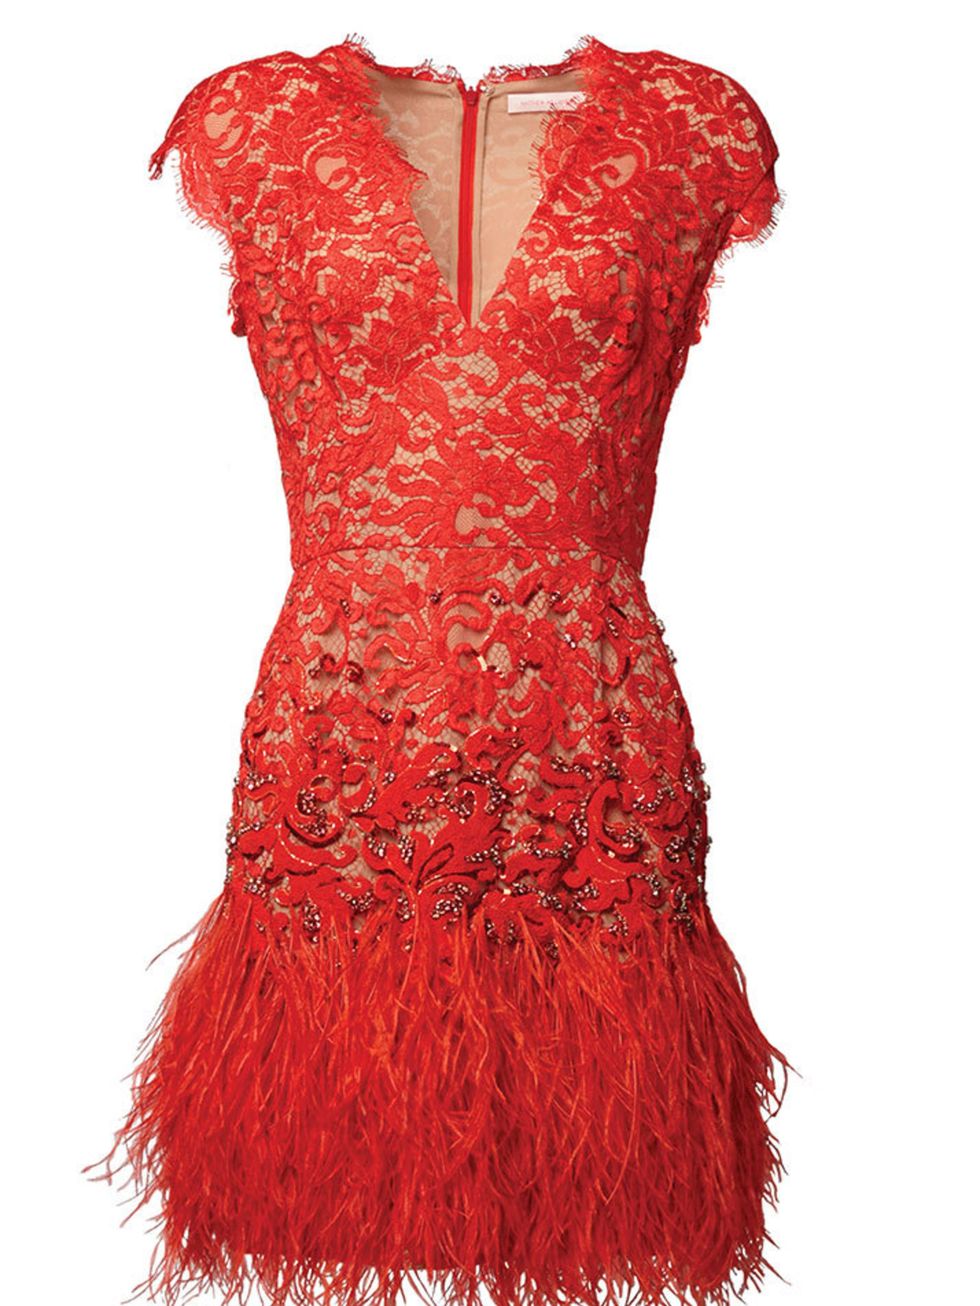 <p>Red Lacquer Lace Feather Dress,</p>

<p><a href="http://www.matthewwilliamson.com/shop/product/9206/red-winter-garden-couture-lace-dress">Buy online</a></p>